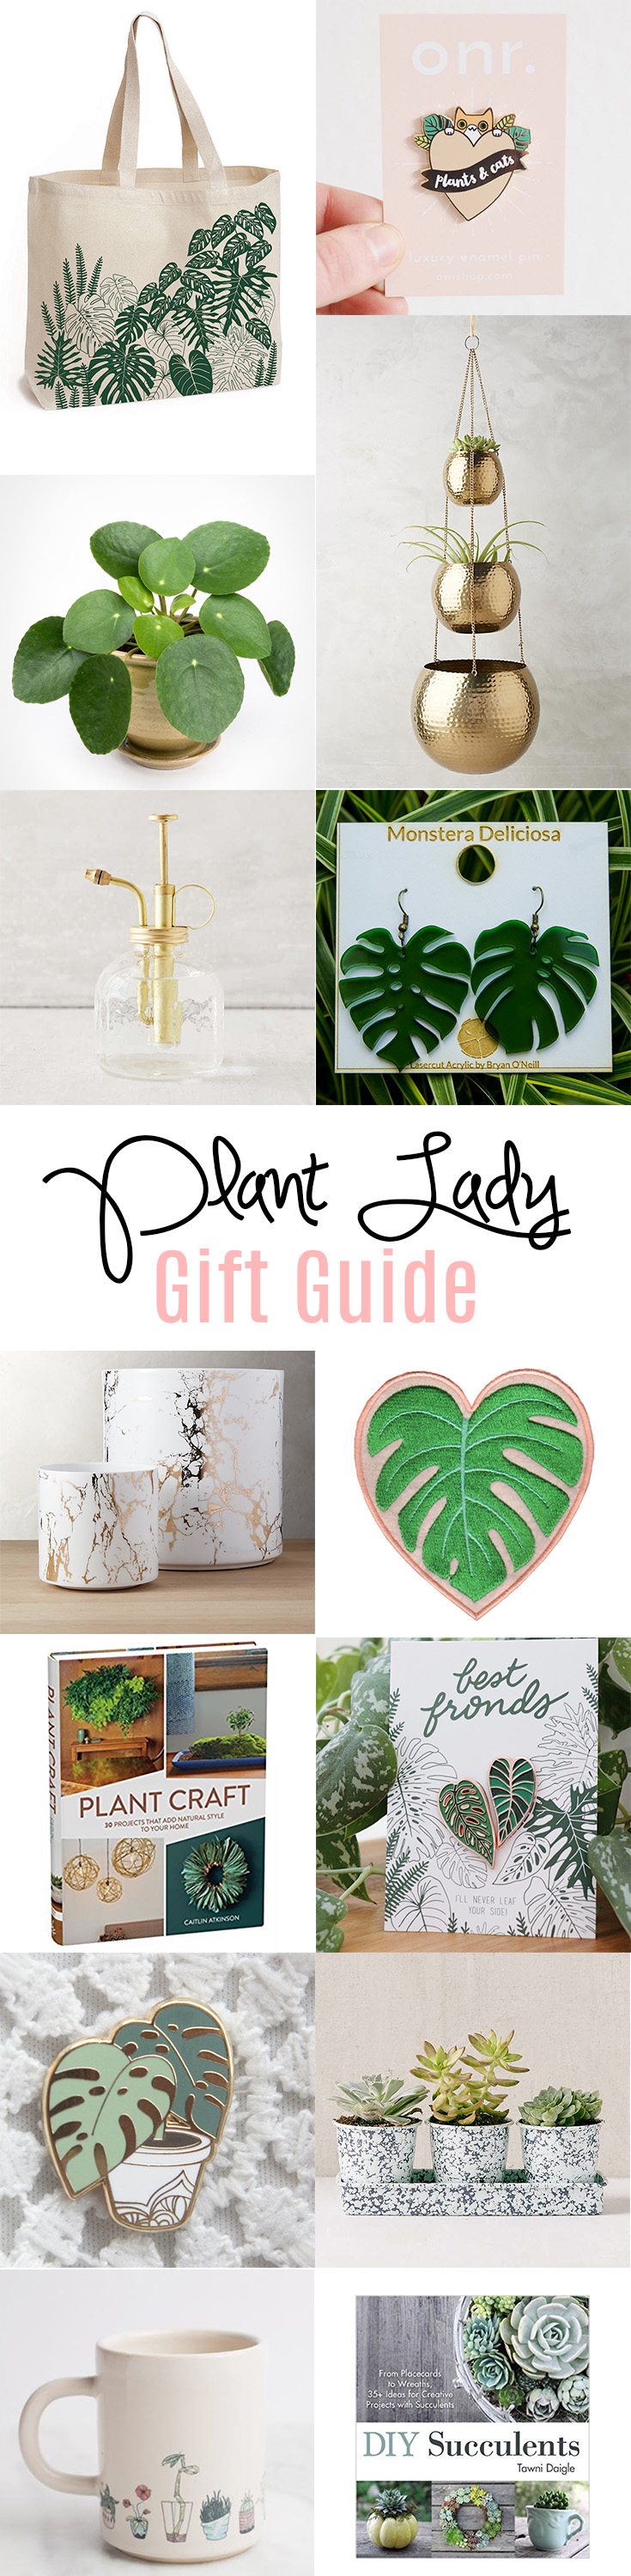 Gifts perfect for the plant lady in your life. #plants #gifts #plantlady #holidays #christmas